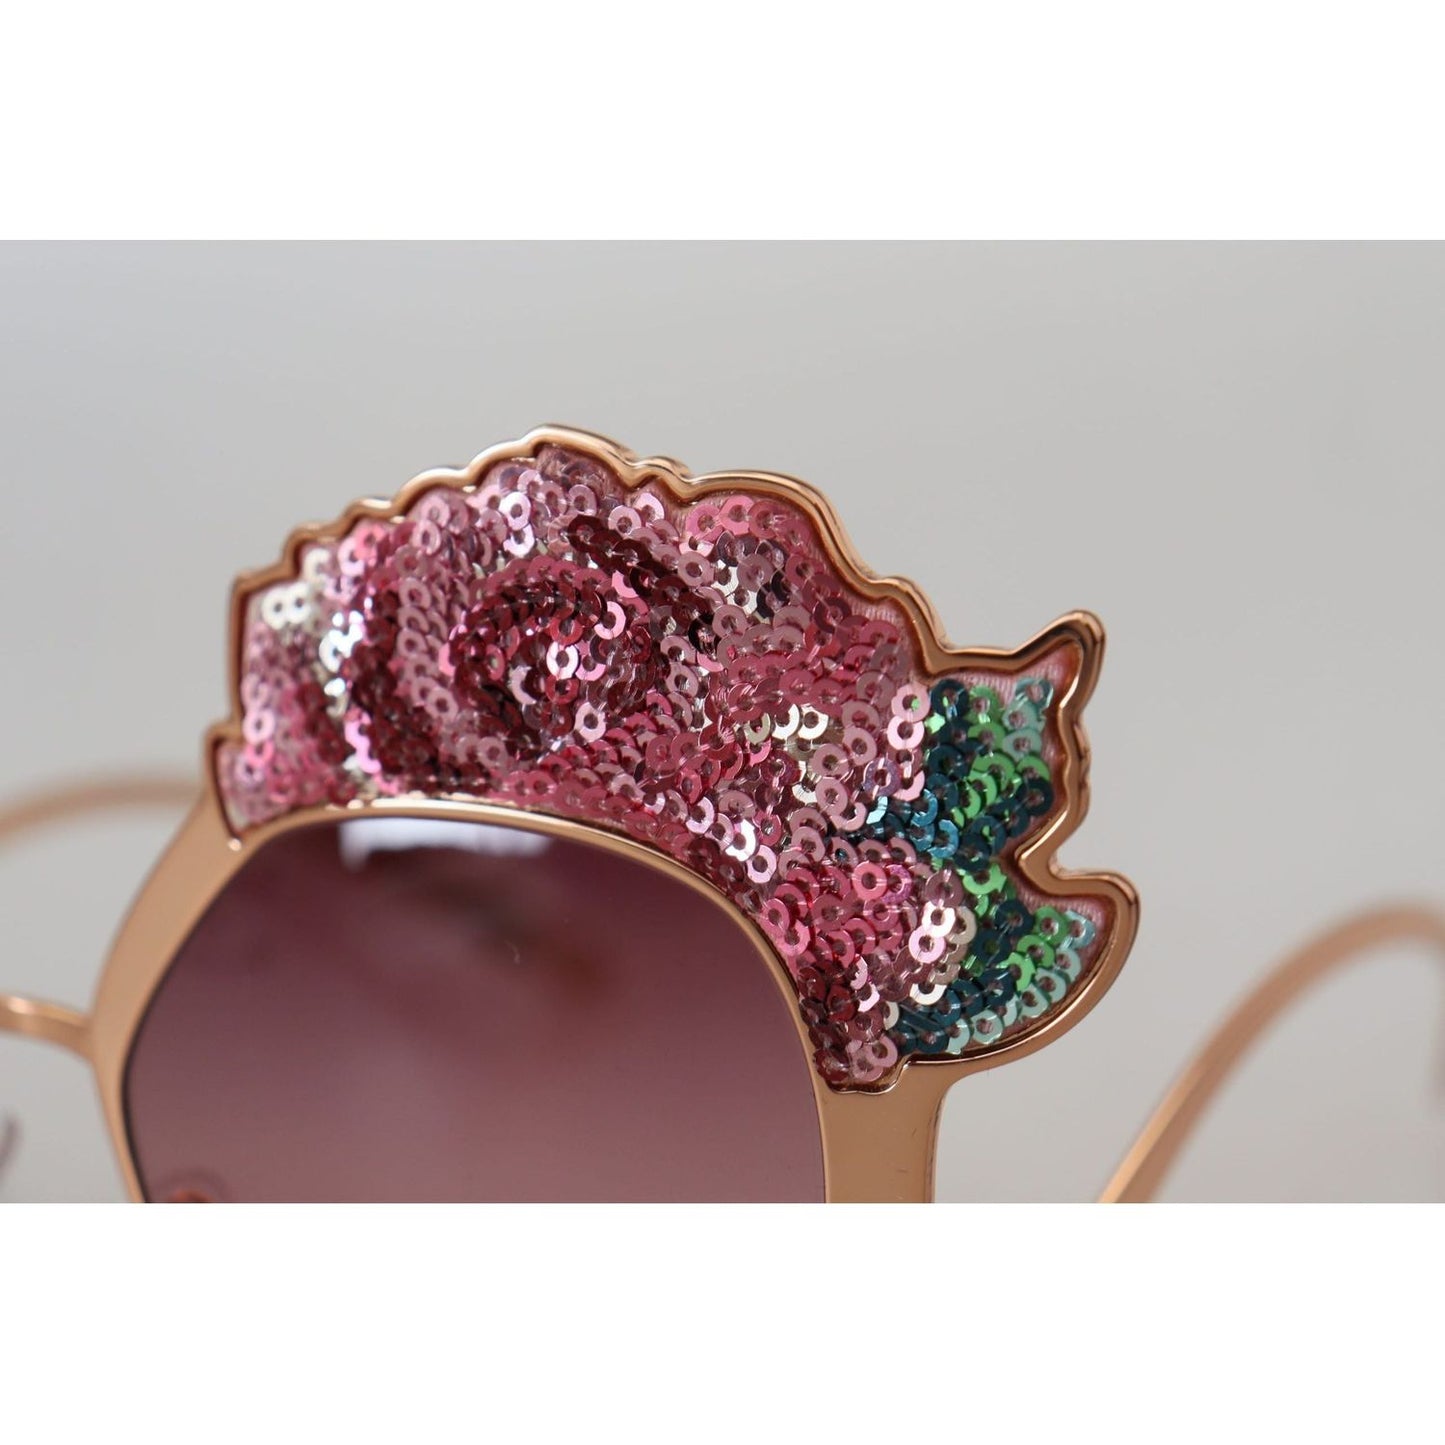 Dolce & Gabbana Chic Rose Sequin Embroidered Sunglasses pink-gold-rose-sequin-embroidery-dg2202-sunglasses IMG_5698-1-scaled-fa143ac0-ae9.jpg